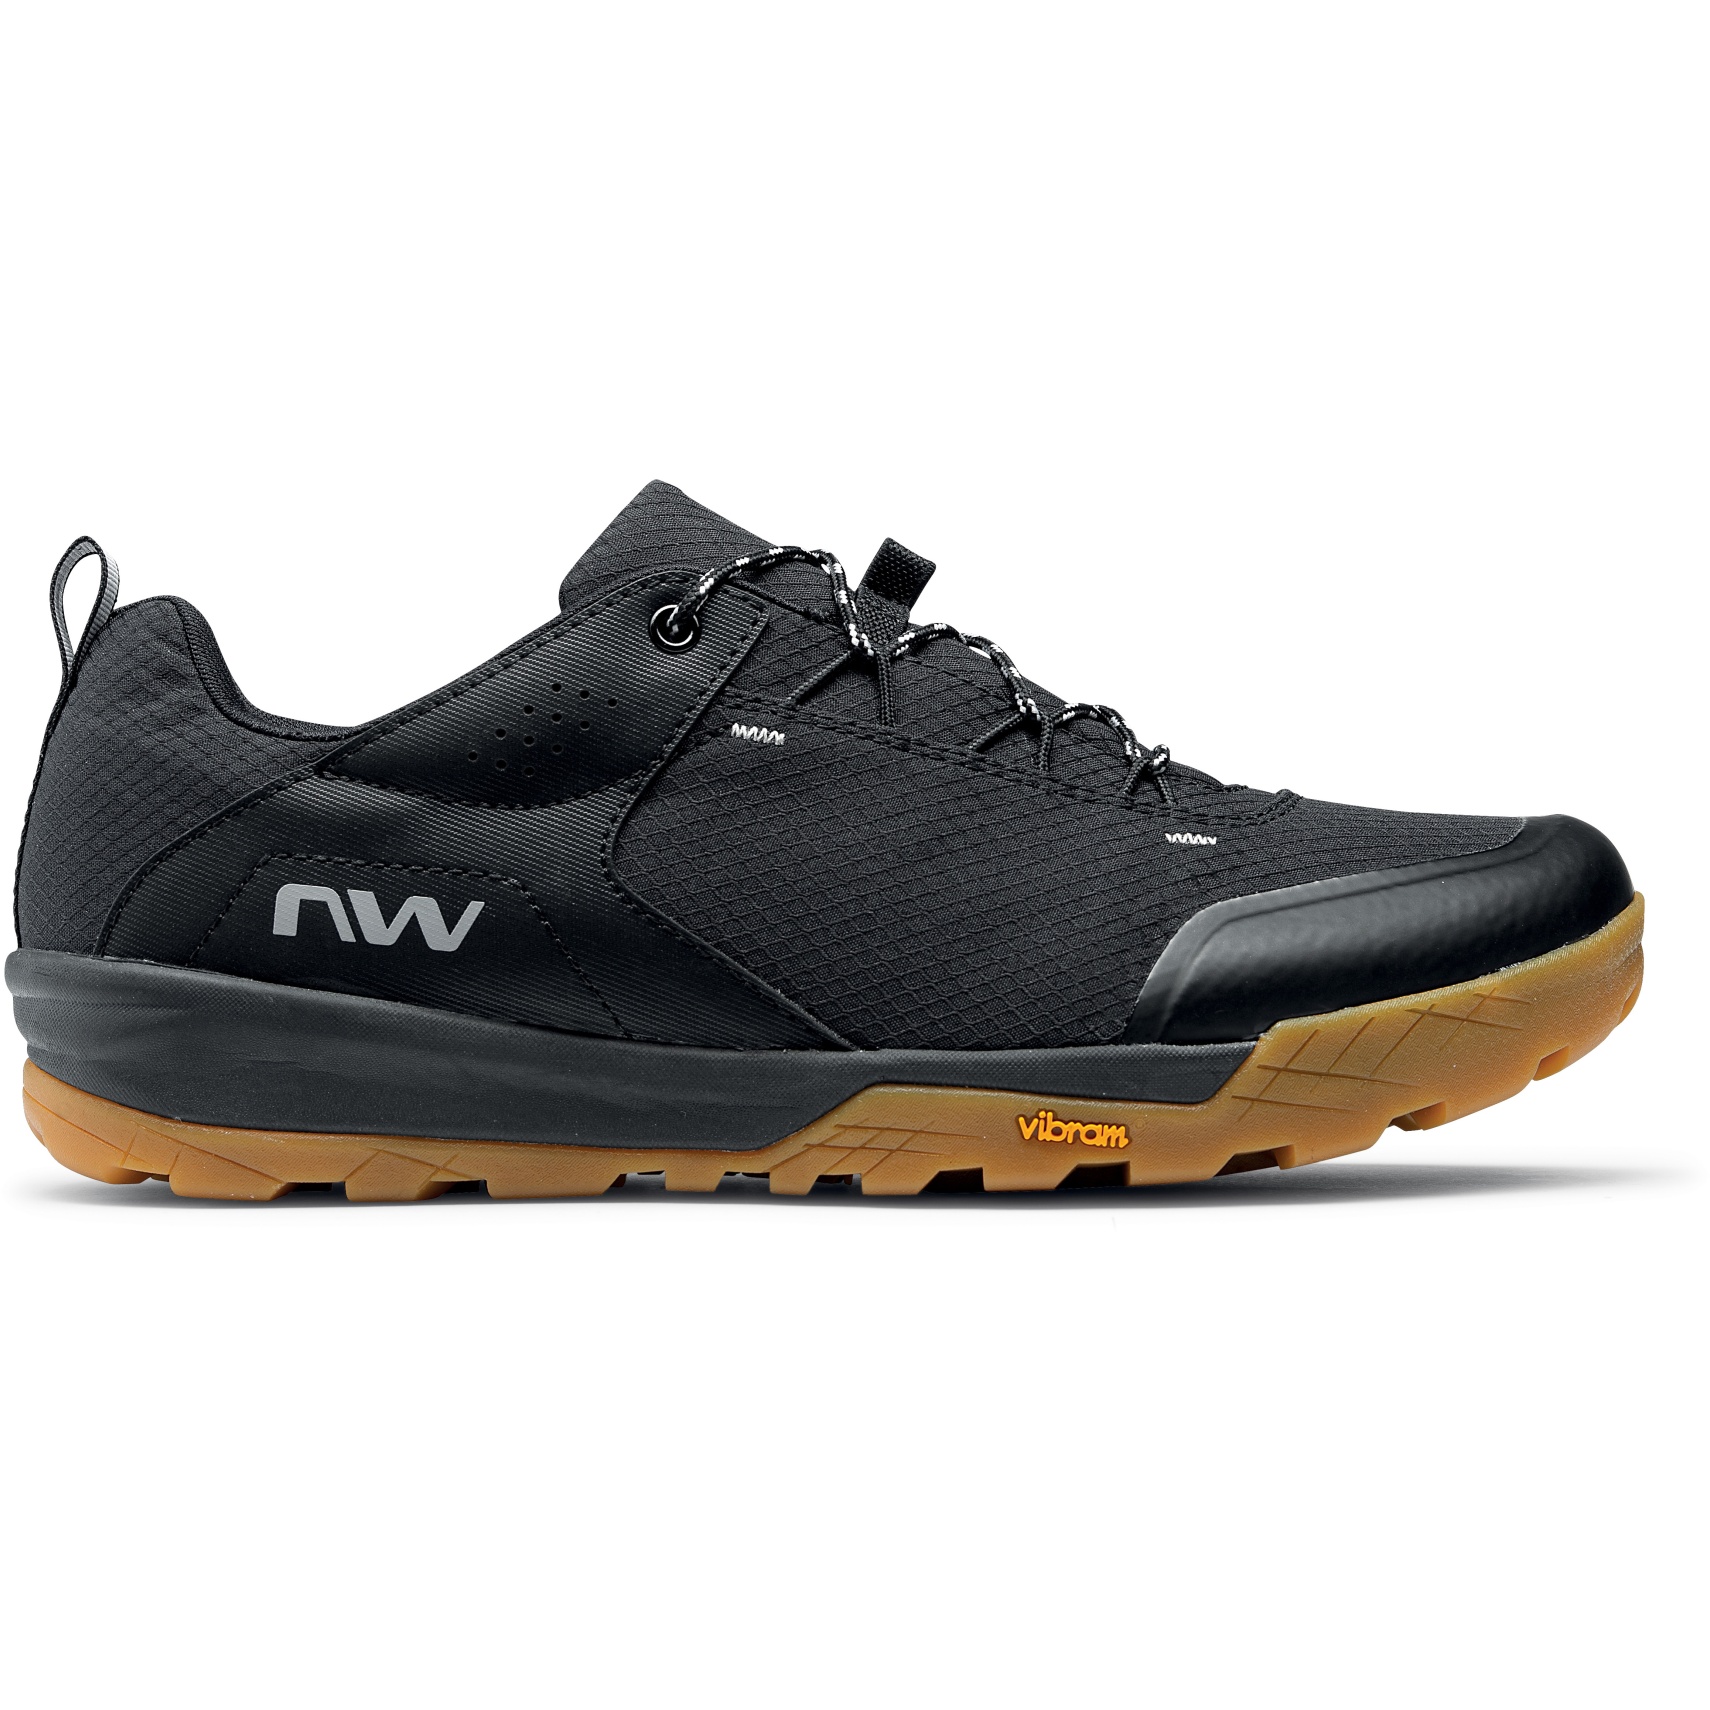 Image of Northwave Rockit All Terain Shoes - black 10